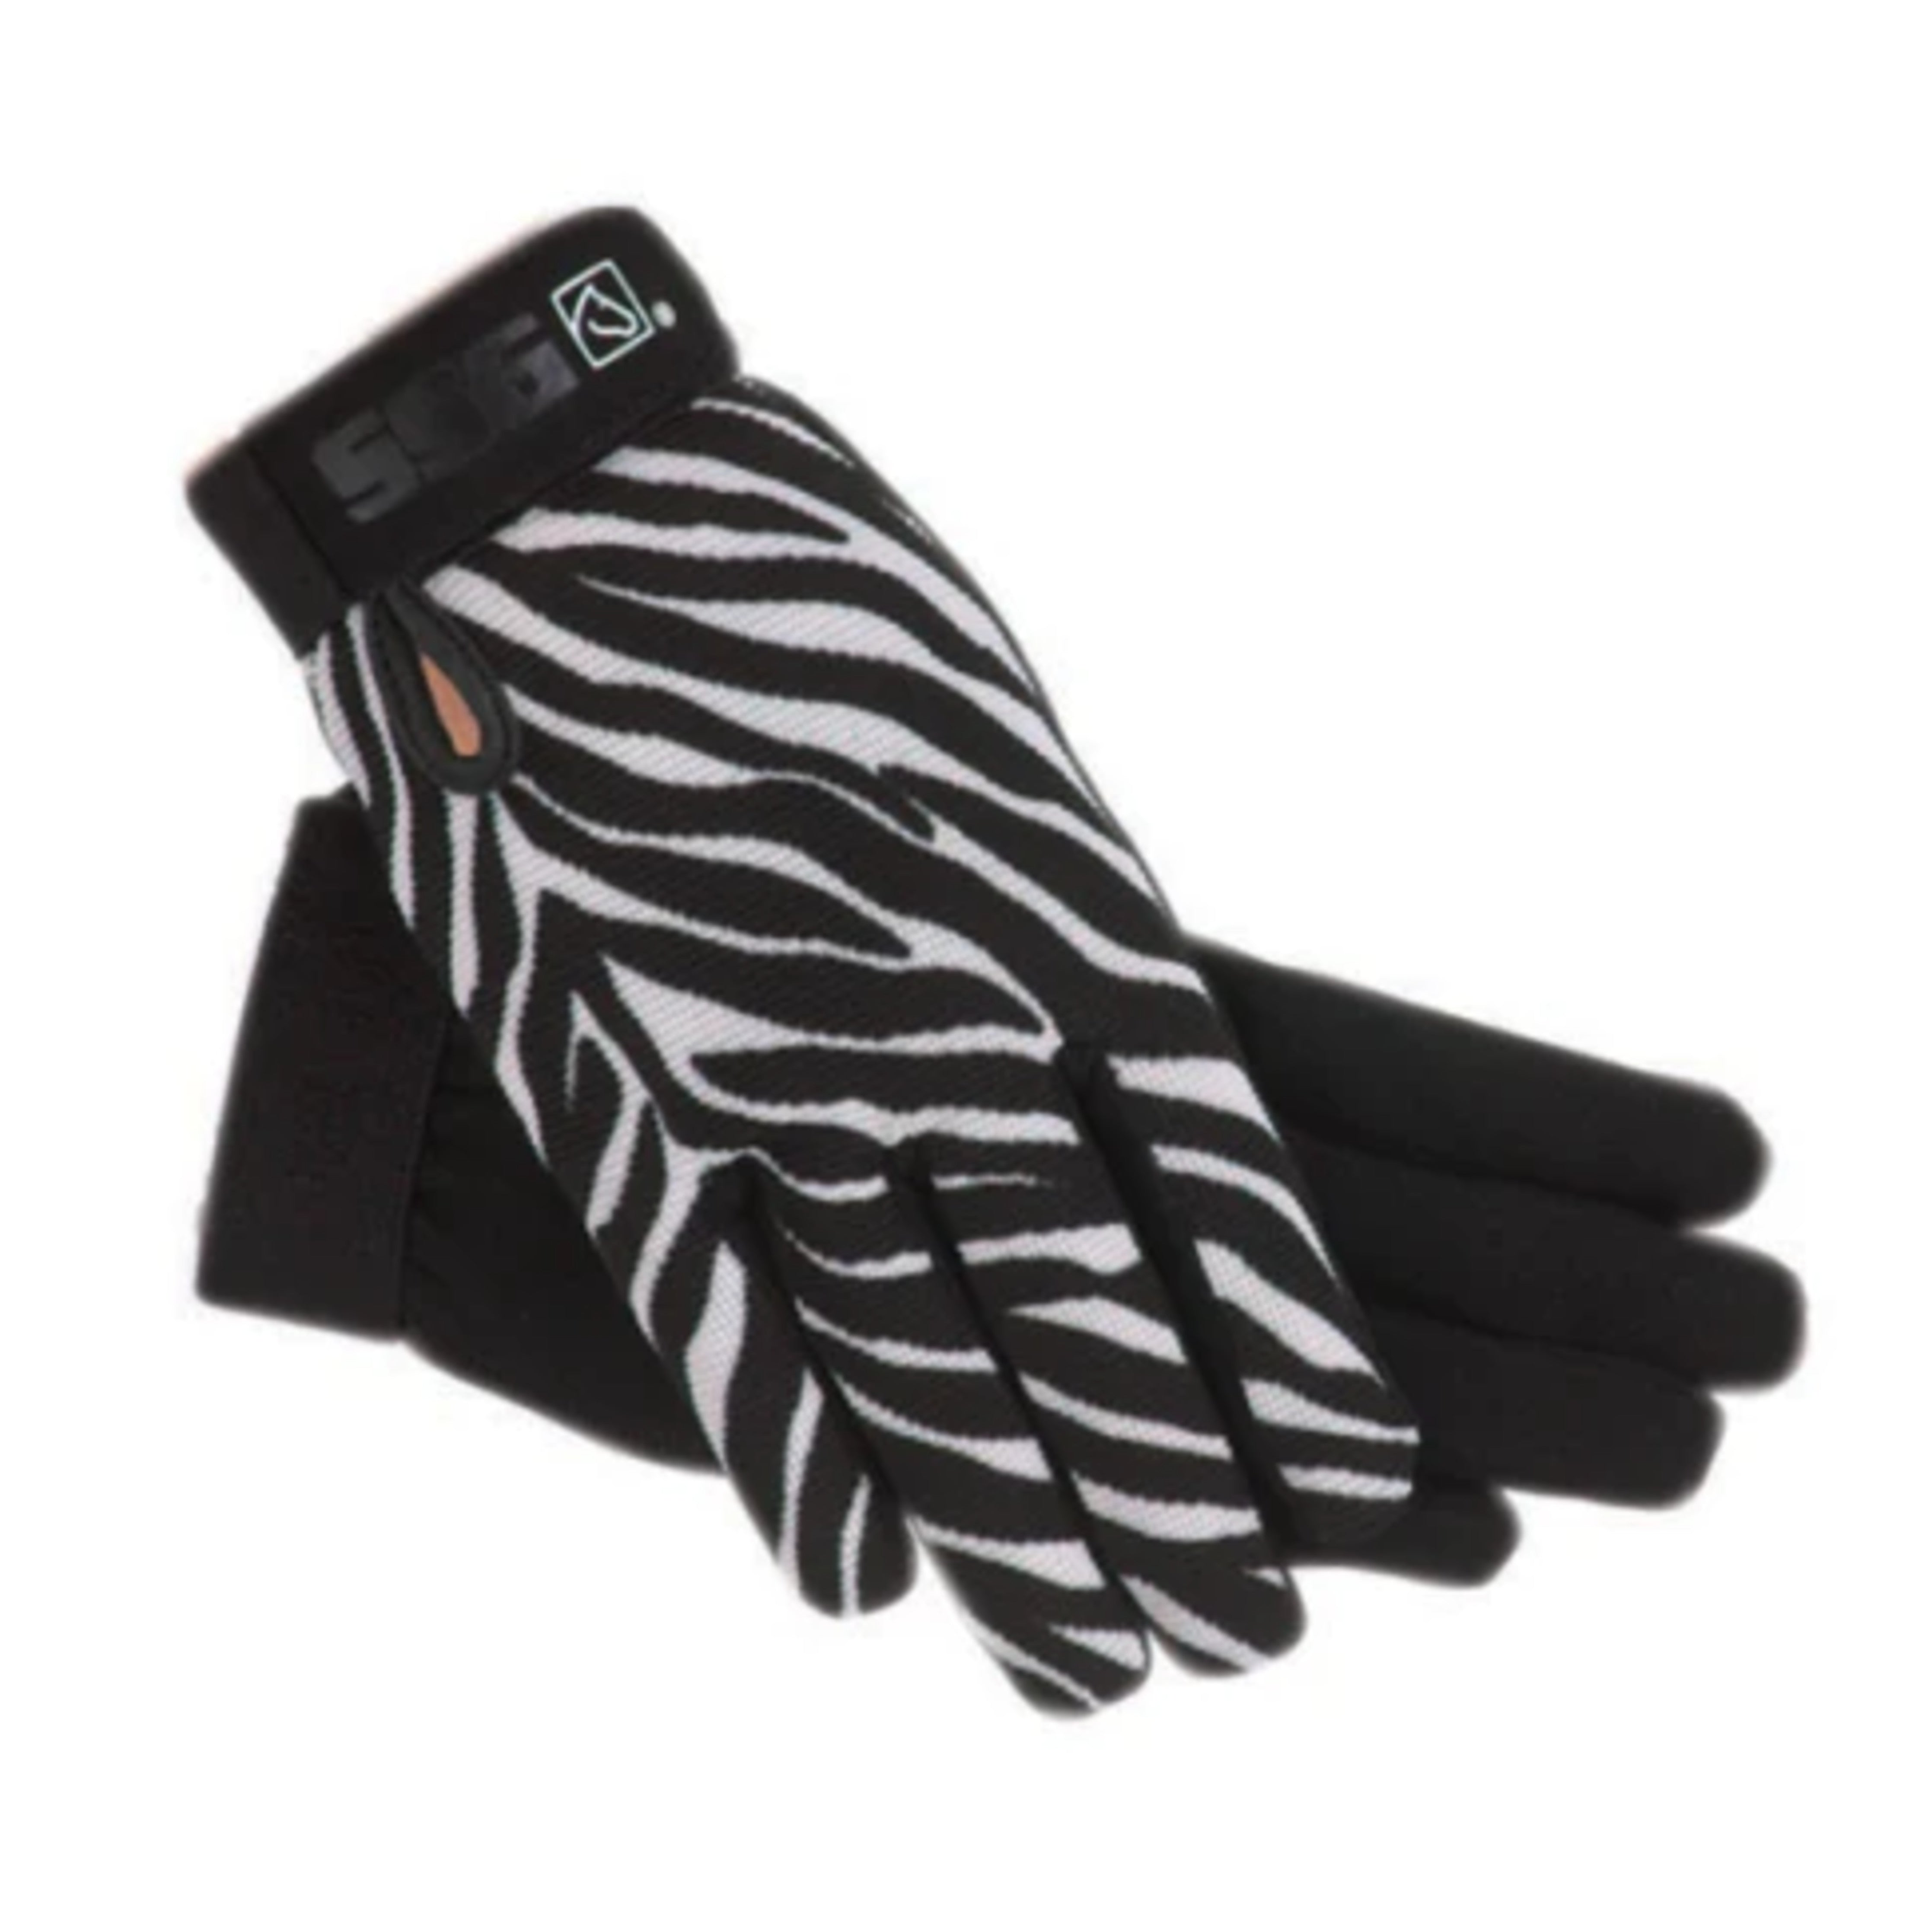 SSG Gloves 8600 All-Weather